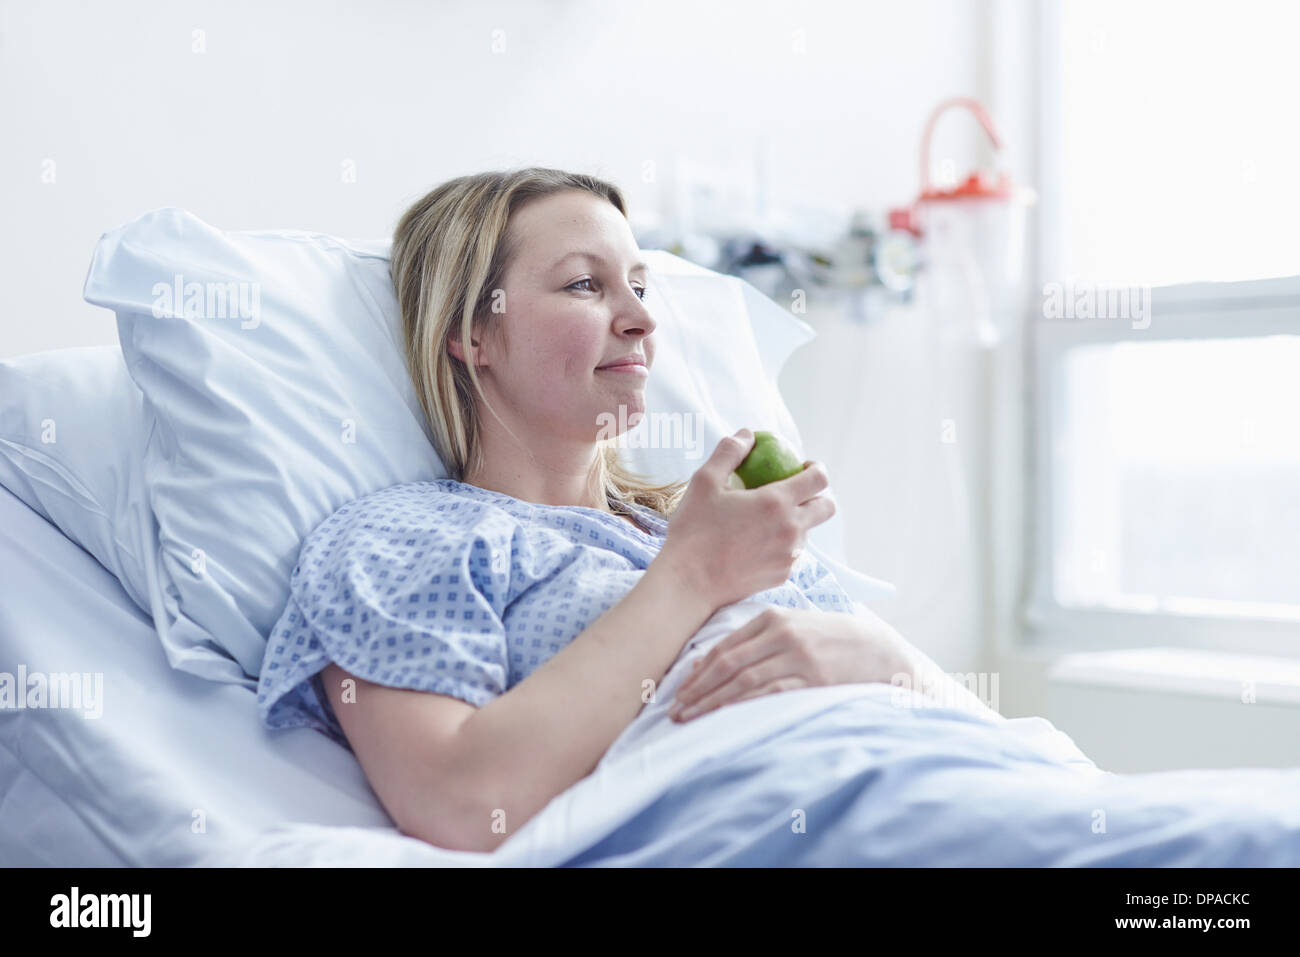 Patient lying in hospital bed eating apple Banque D'Images